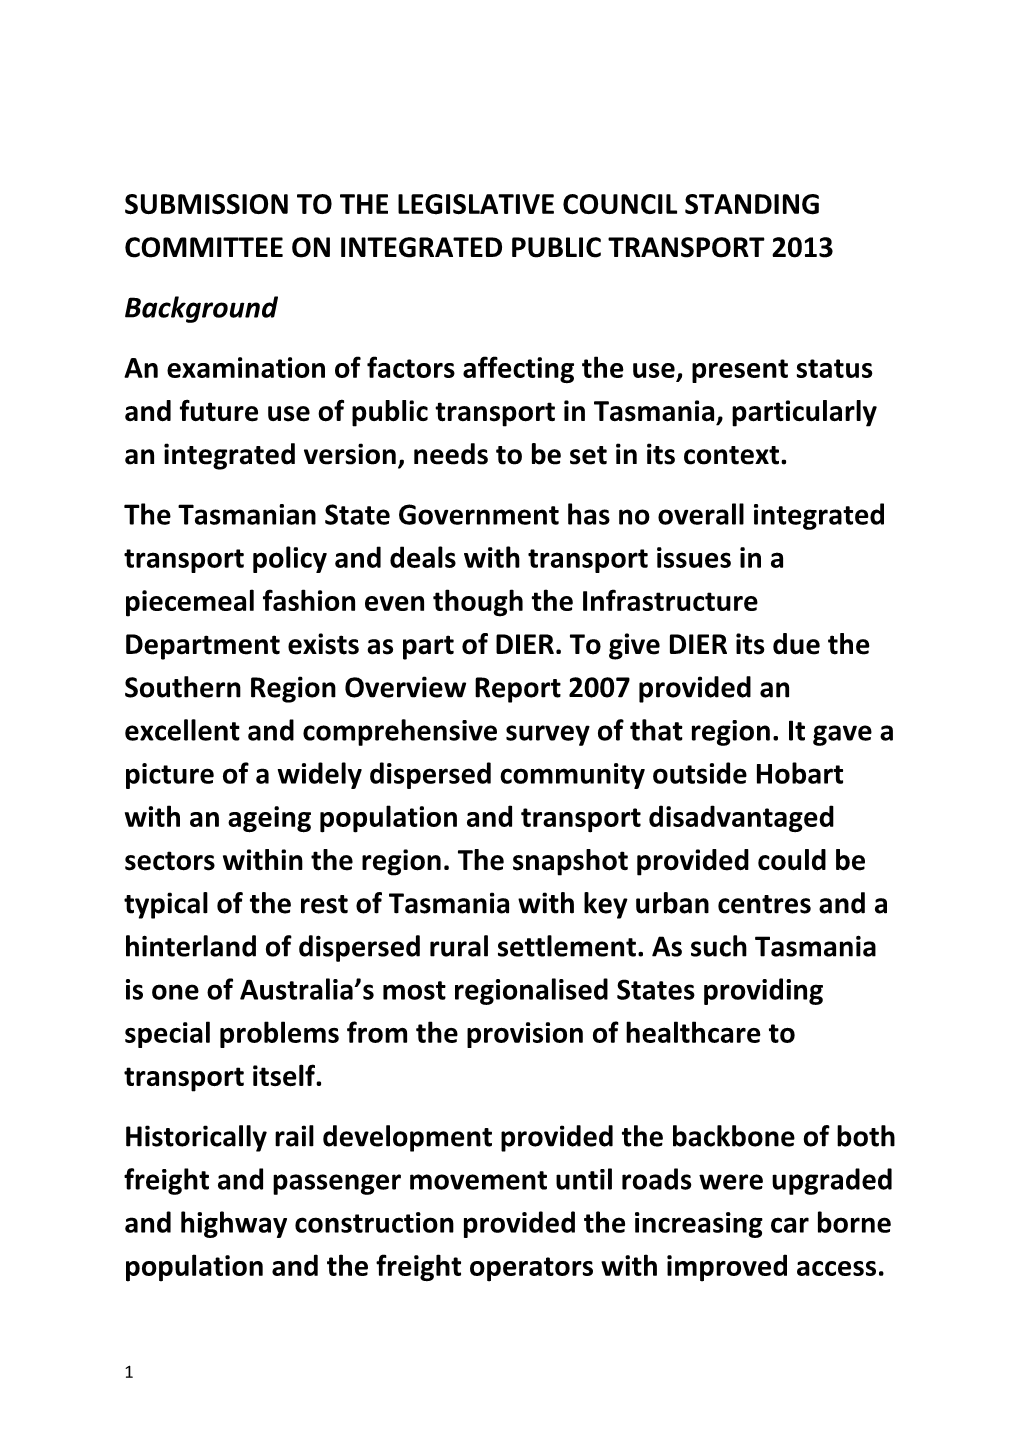 Submission to the Legislative Council Standing Committee on Integrated Public Transport 2013